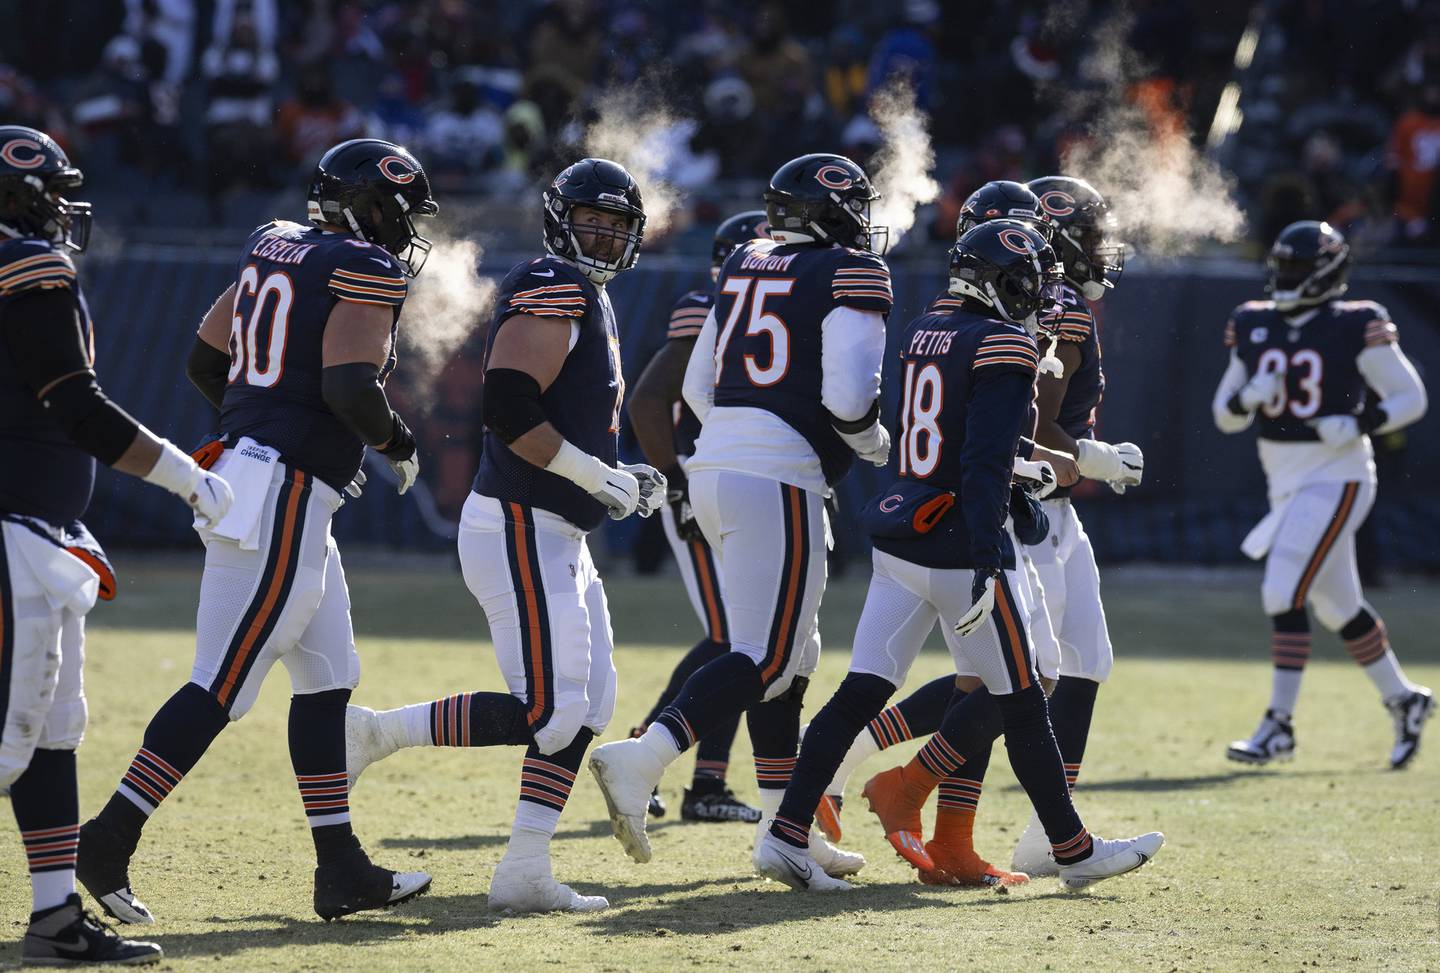 The Bears leaves the field in the first quarter of the 35-13 loss to the Bills at Soldier Field on Dec. 24, 2022.